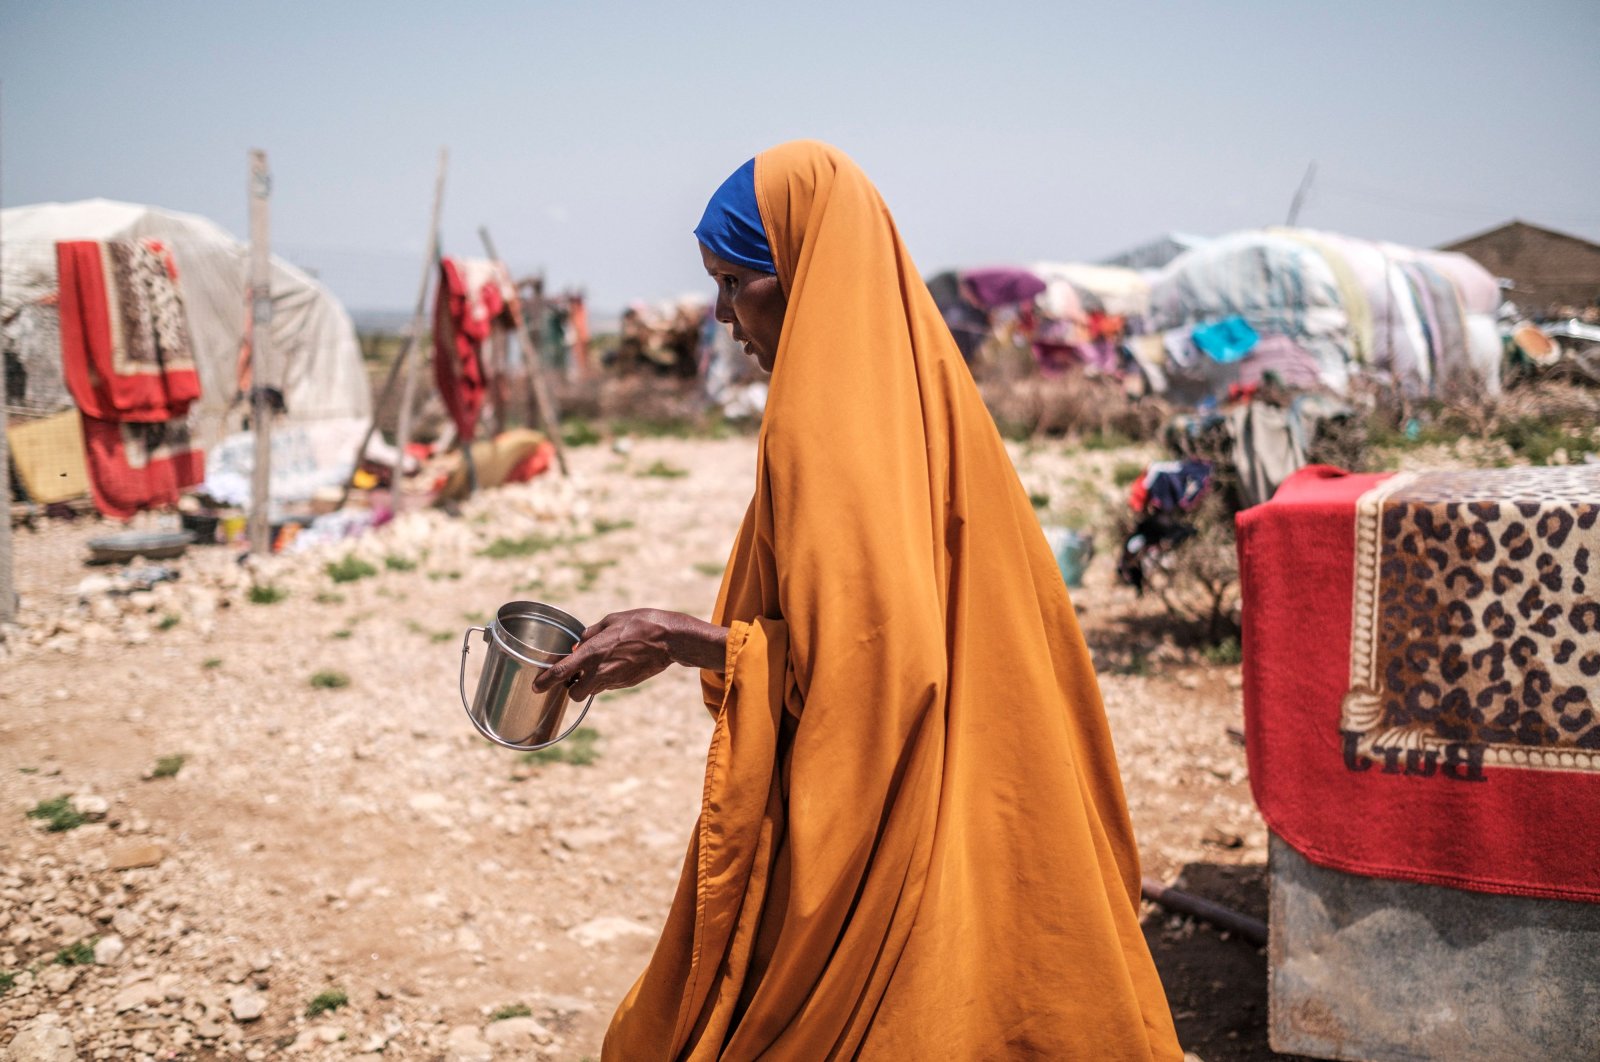 Yurub Abdi Jama, a 35-year-old mother of eight children, walks while holding a cup in an informal settlement of internally displaced people in the outskirts of the city of Hargeisa, Somaliland, Somalia, Sept. 16, 2021. (AFP File Photo)